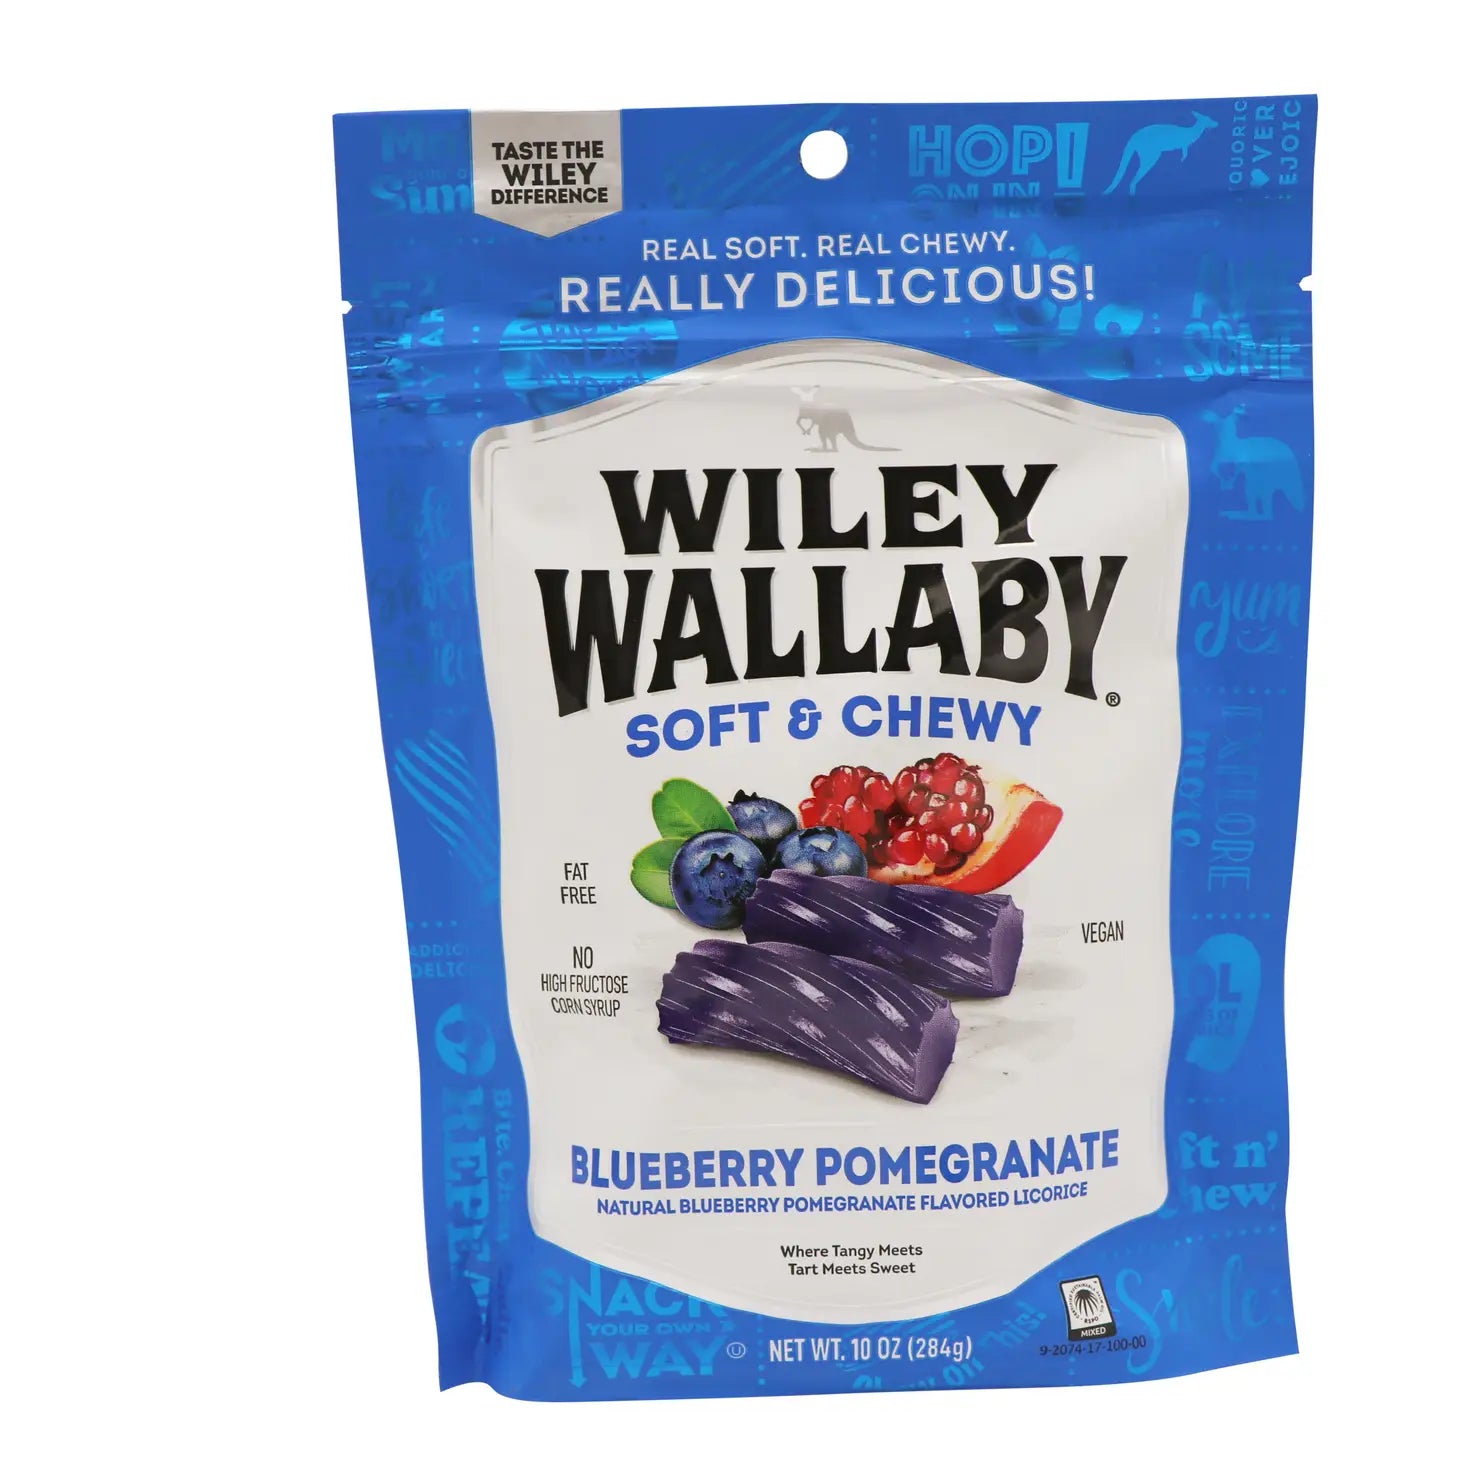 Wiley Wallaby Blueberry Pomegranate Licorice - 10oz